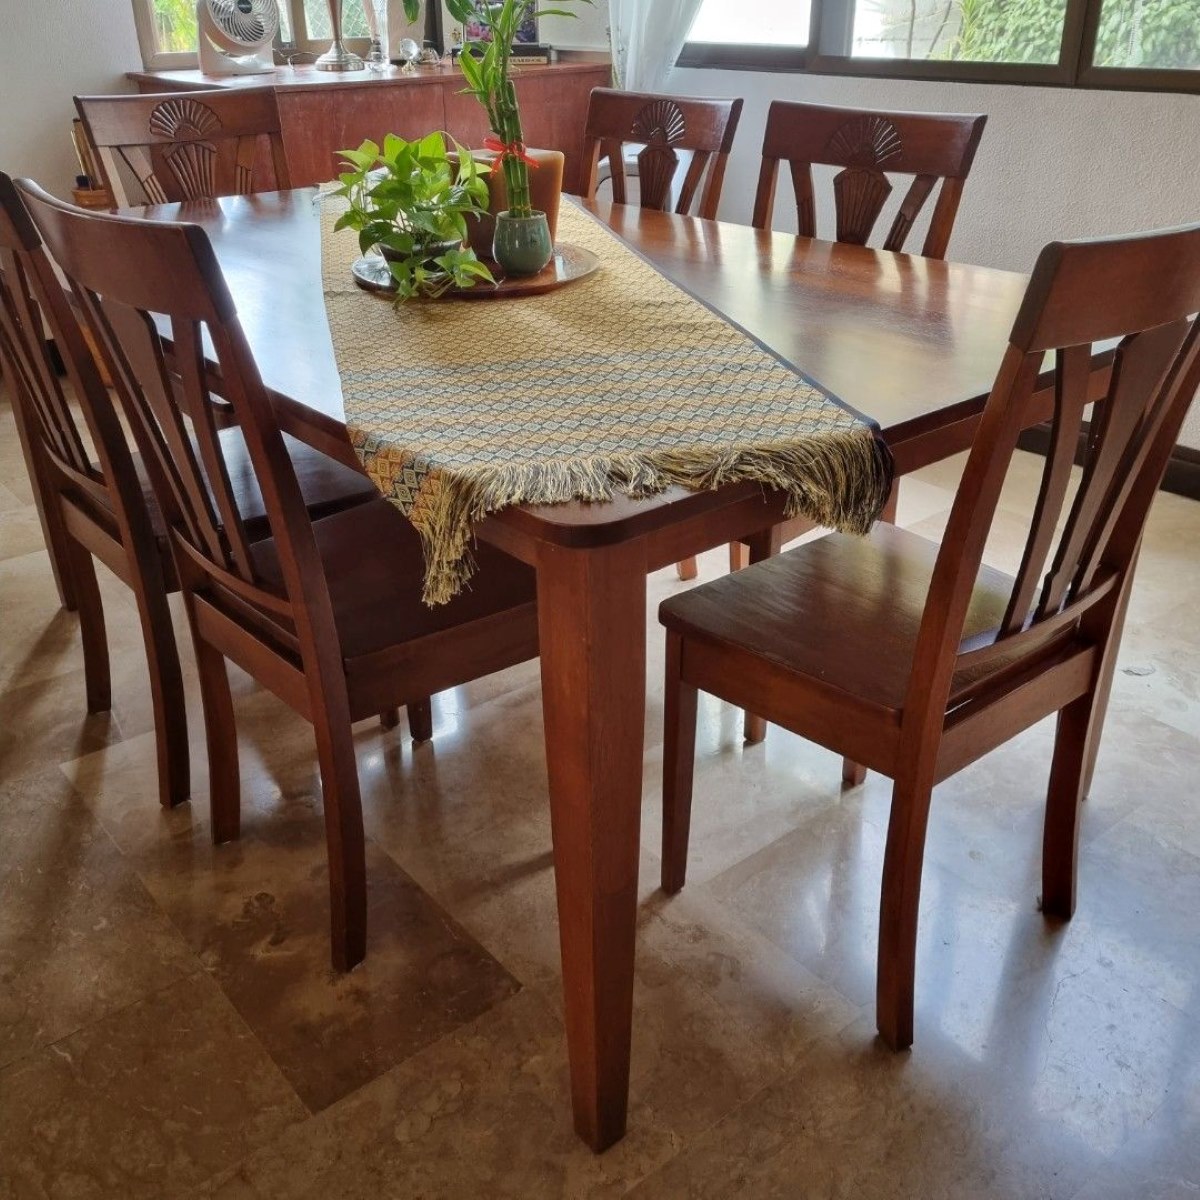 Where Can I Buy Dining Room Chairs